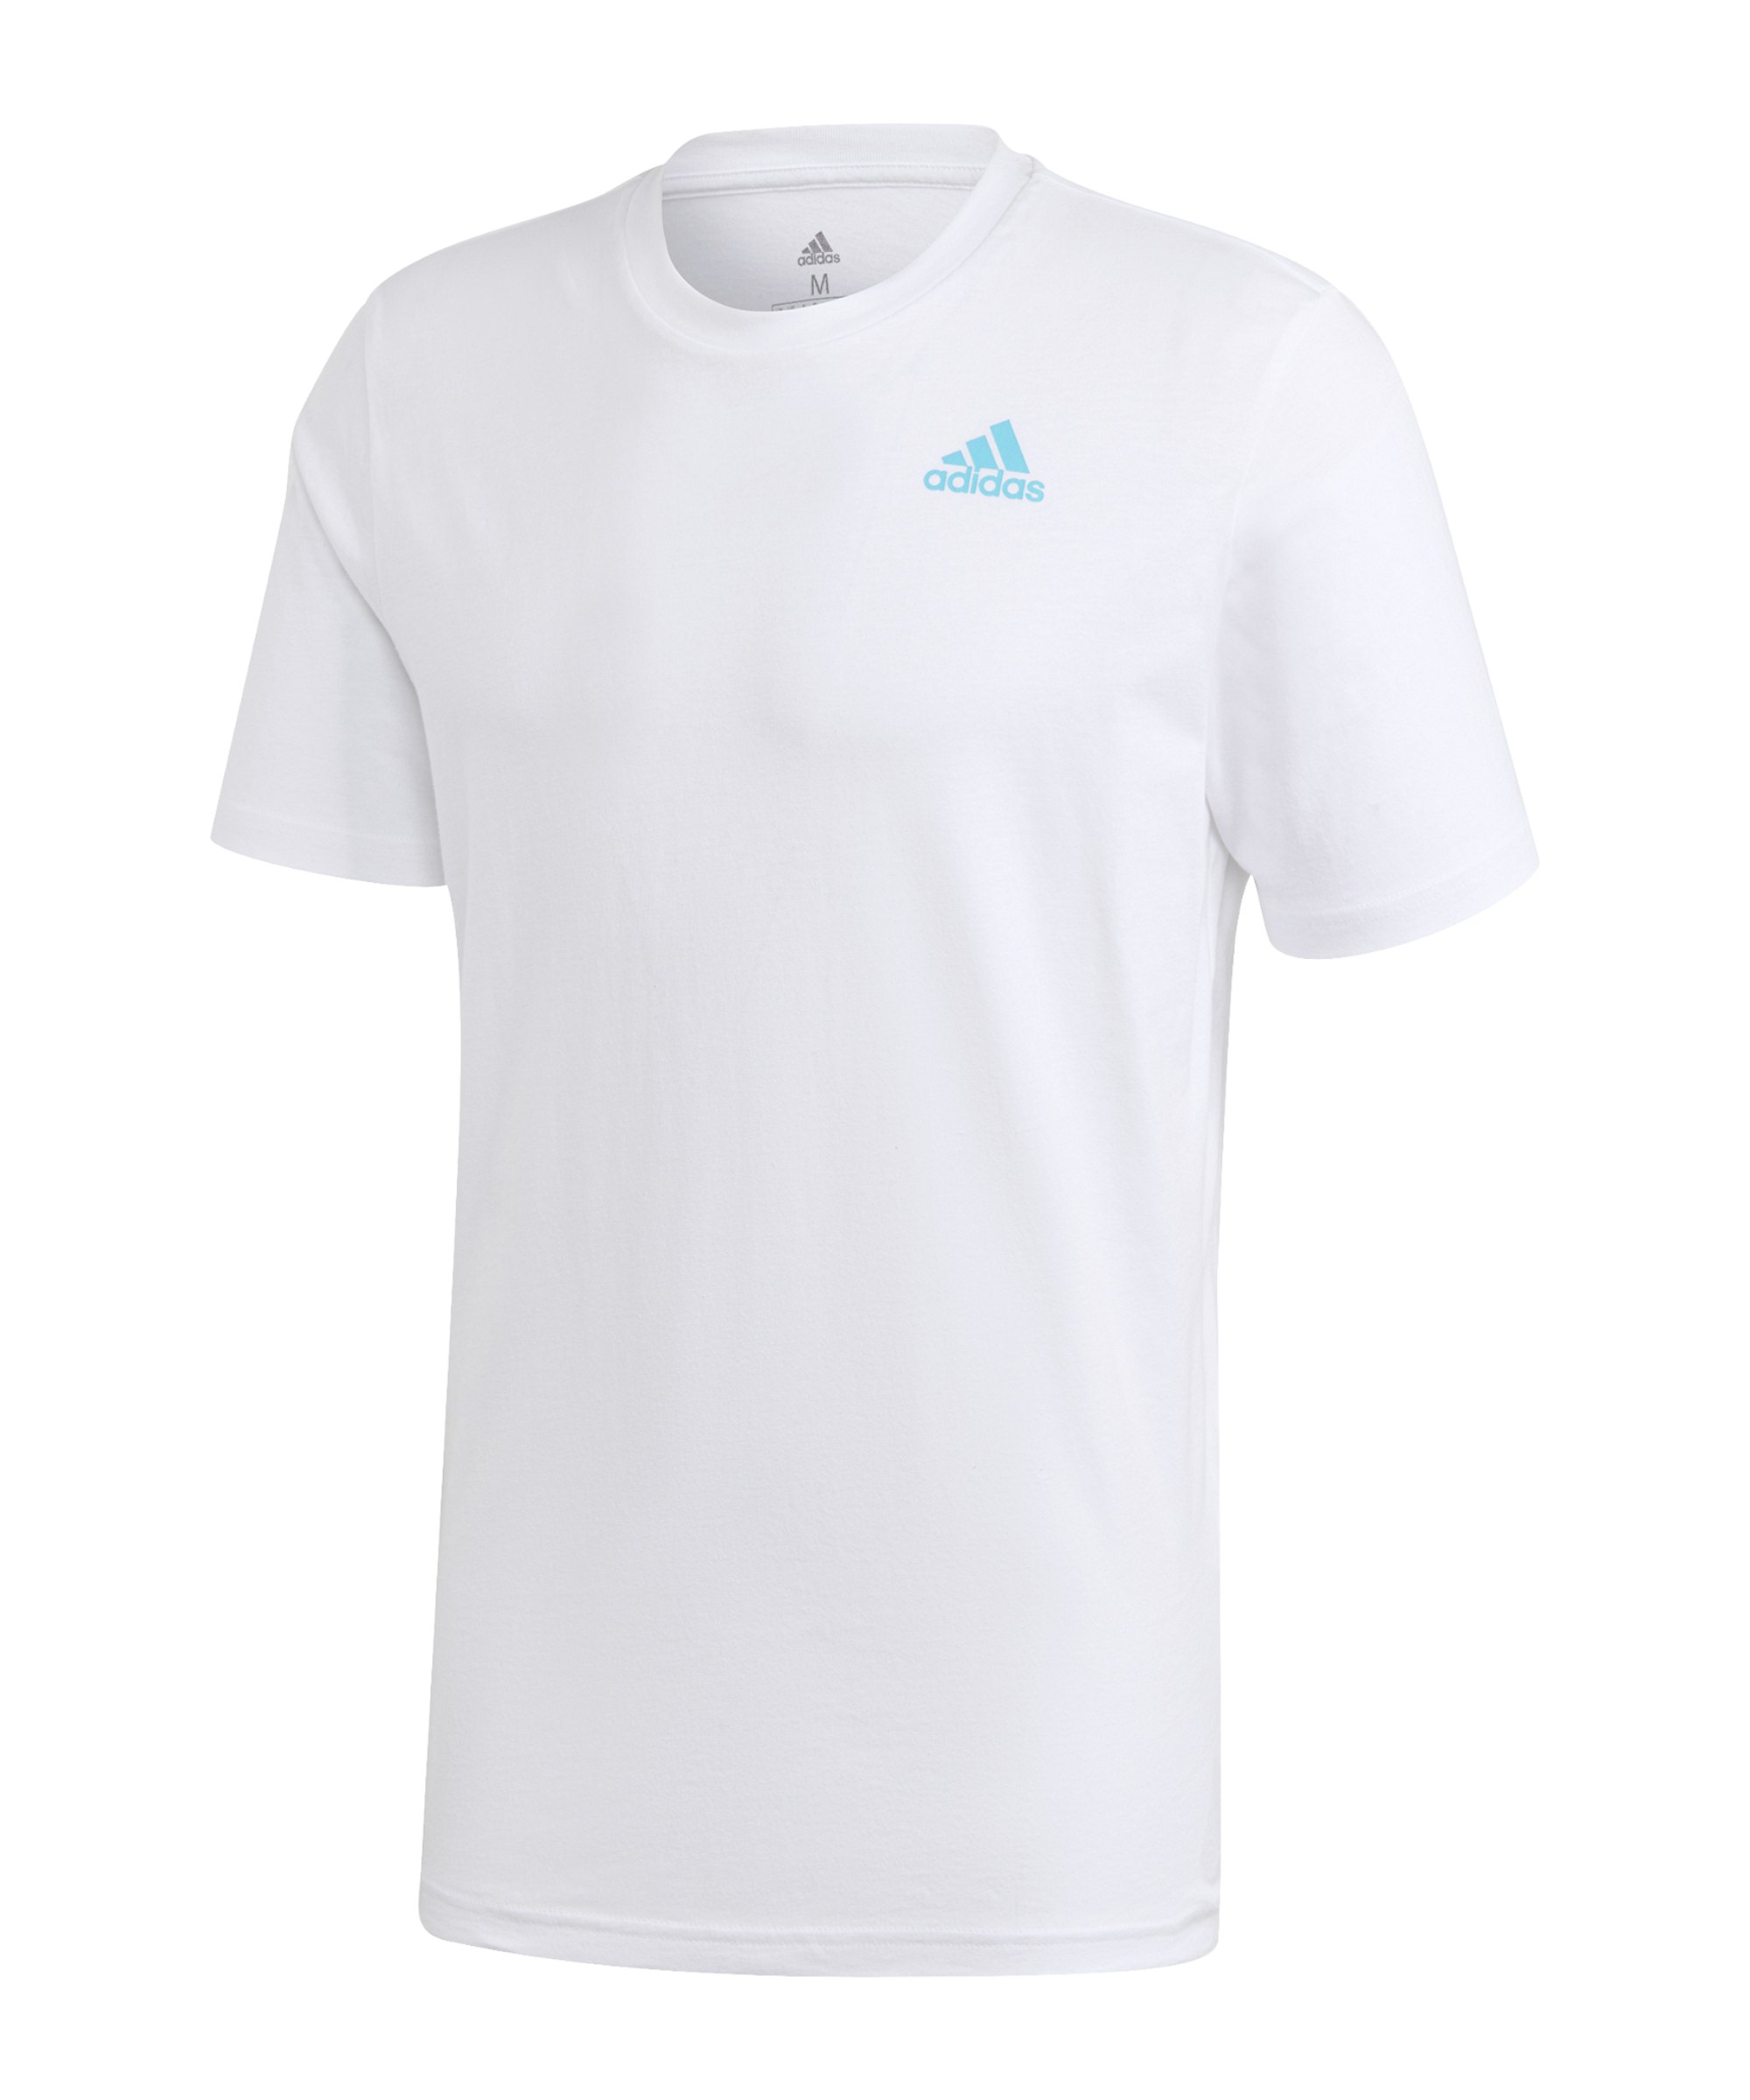 adidas Snack GPX Graphic T-Shirt Weiss - weiss